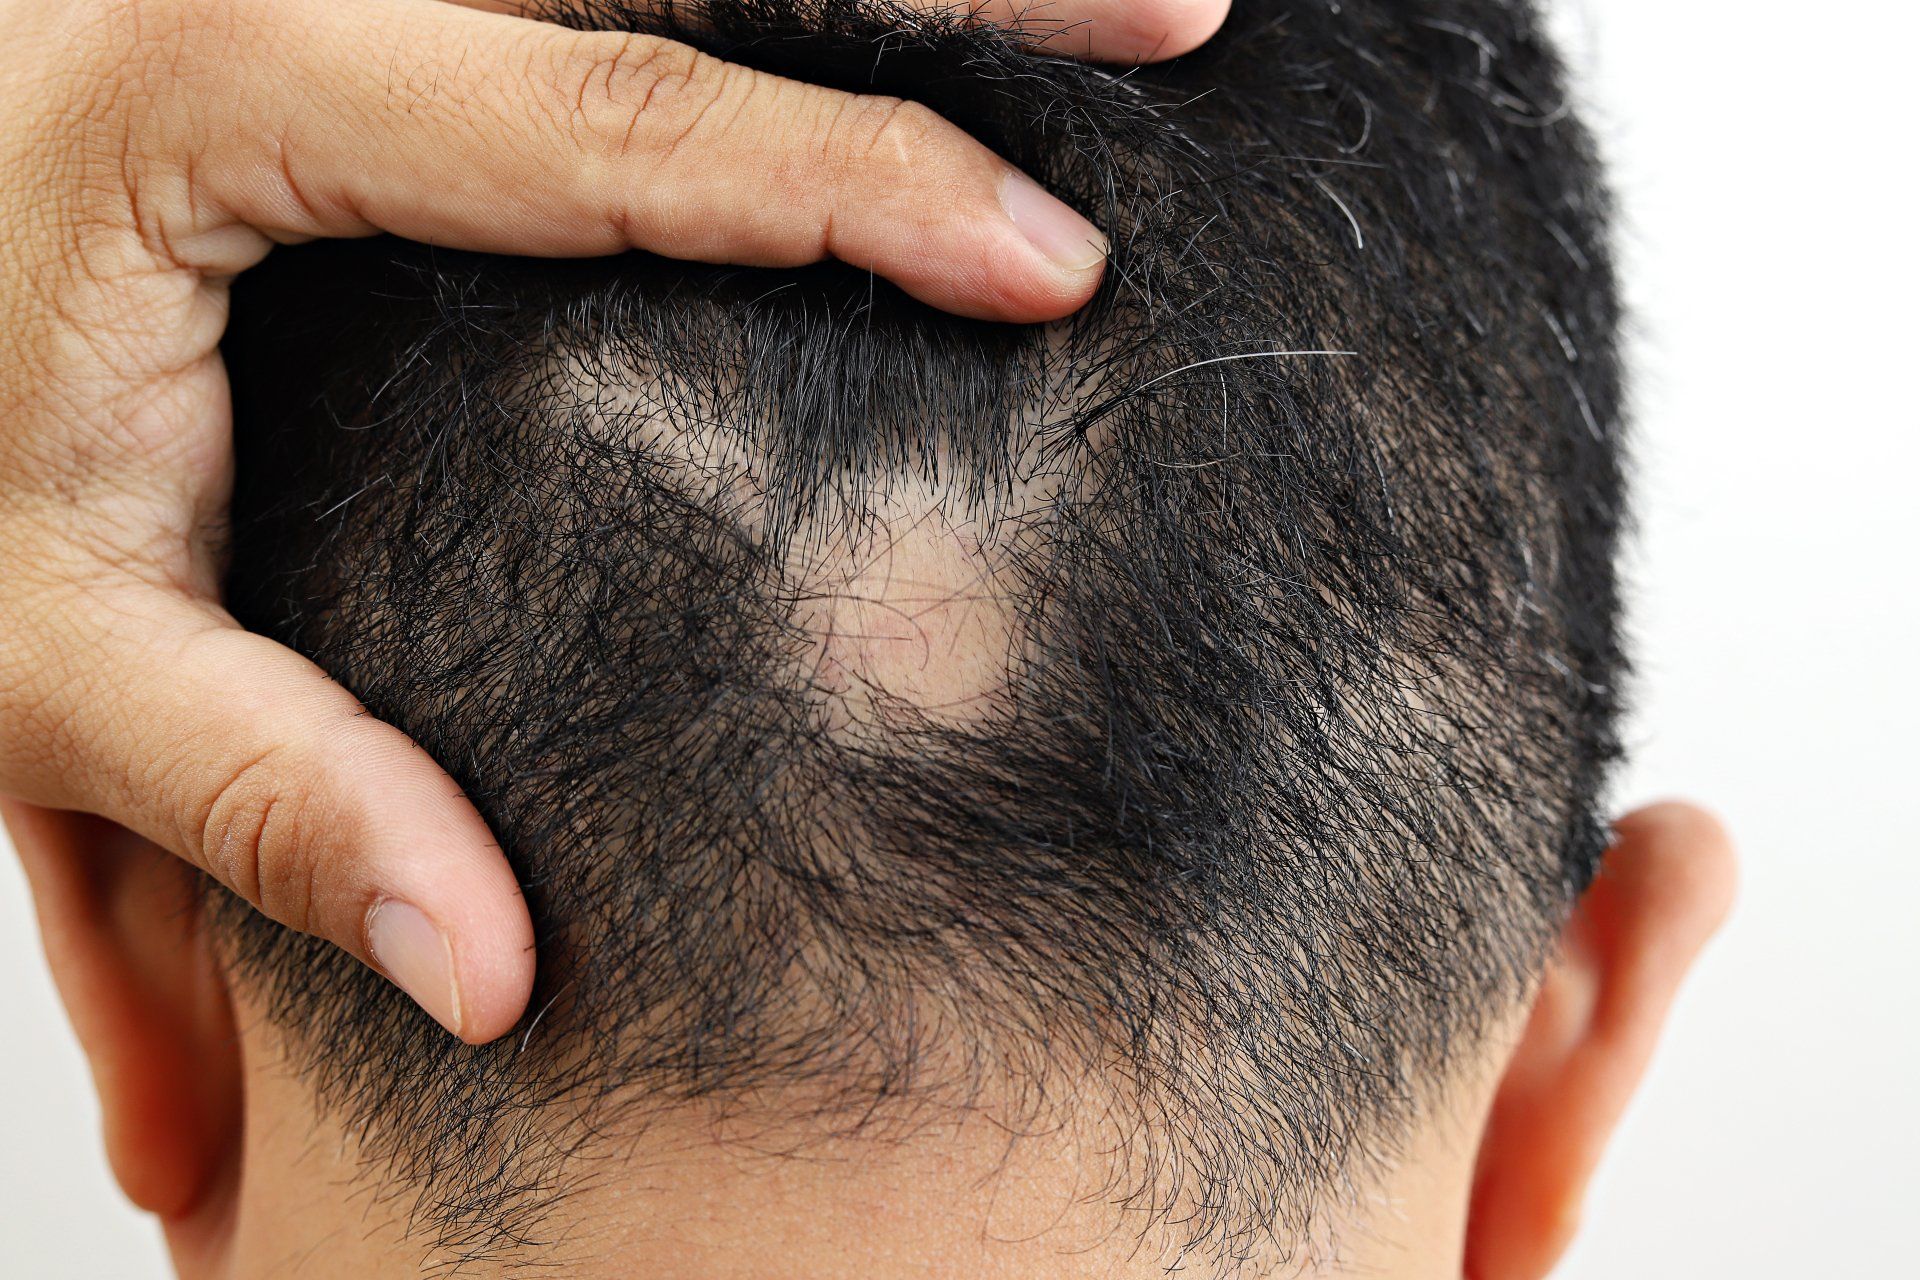 Image of Man with Alopecia Areata (Hair Loss) on Back of Head